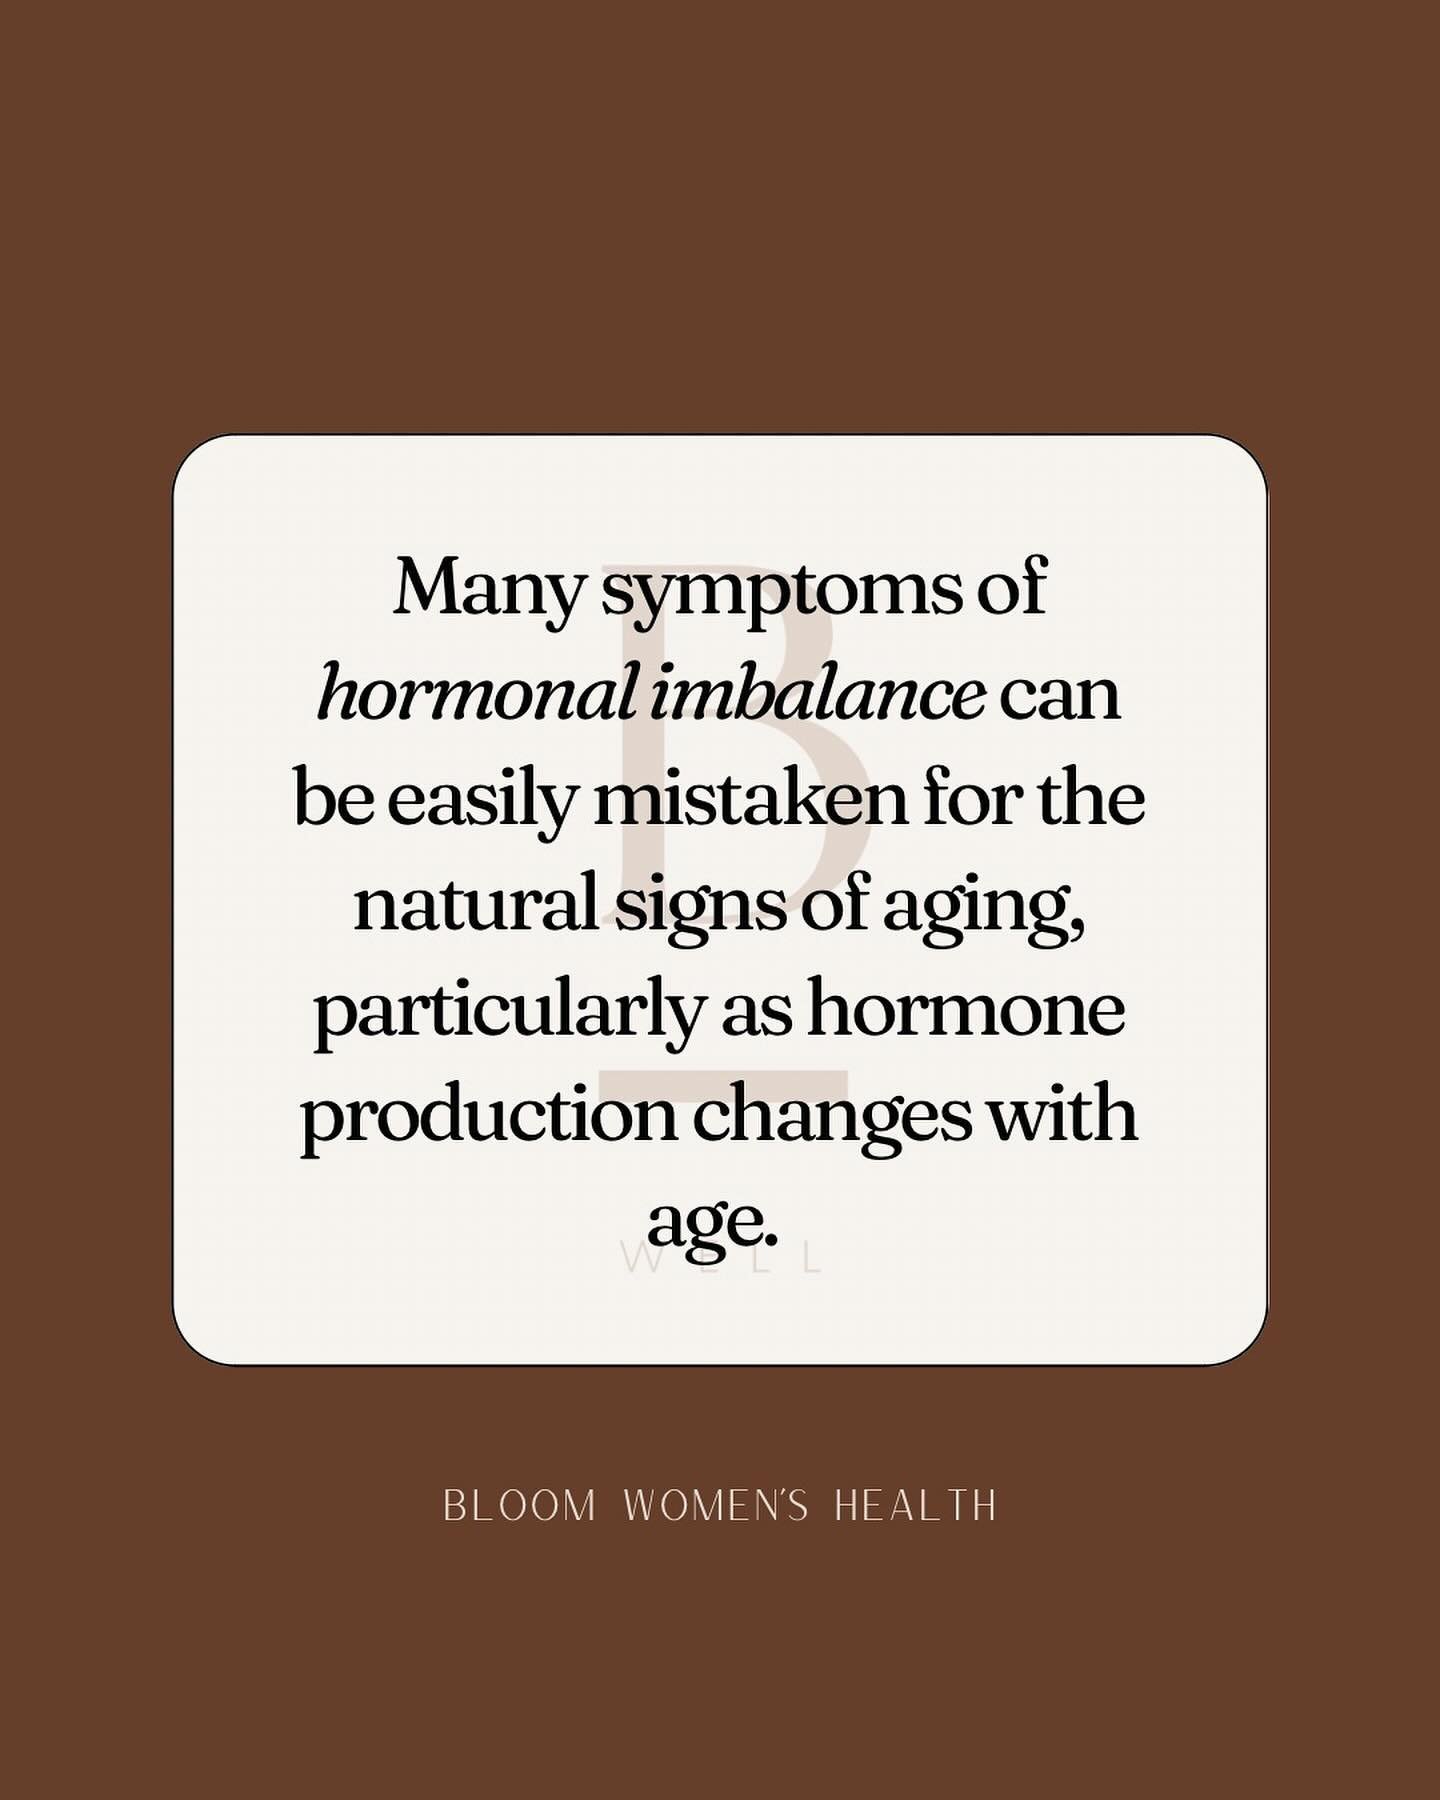 Are you experiencing difficulty concentrating, feeling tired all the time, muscle weakness, or hair thinning? These hidden signs could be symptoms of hormonal imbalance. 

At Bloom Women&rsquo;s Health, we specialize in getting to the root cause of y